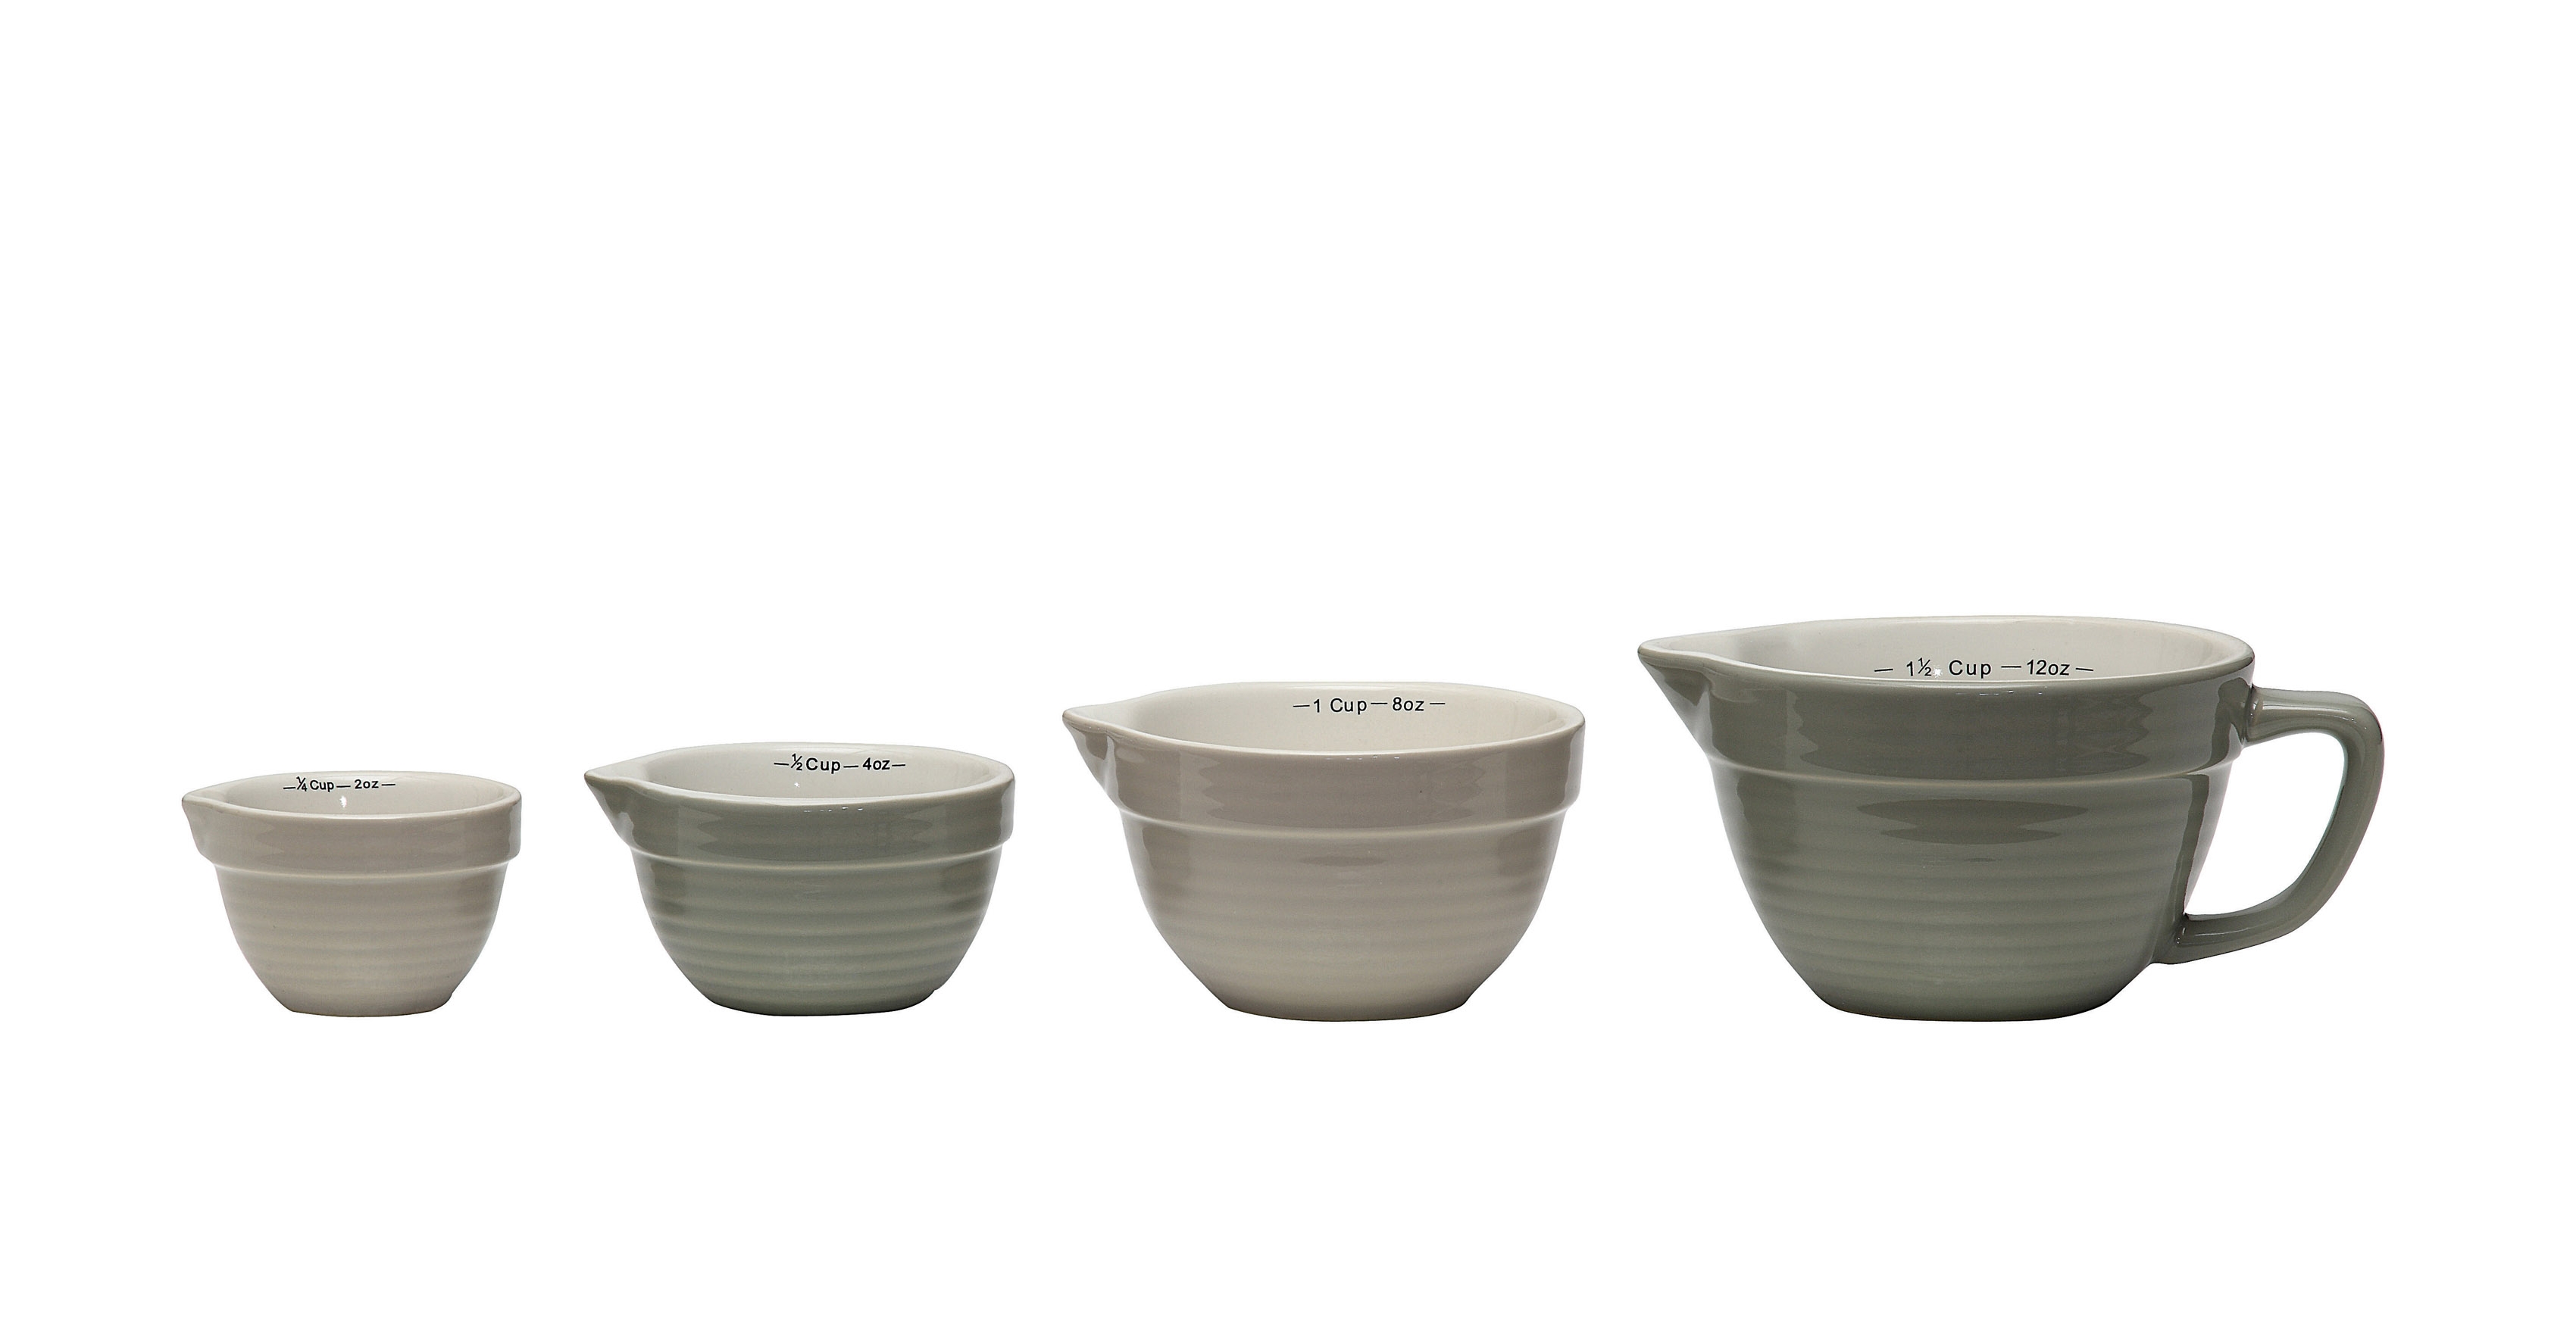 Batter Bowl Shaped Measuring Cups in Greys (Set of 4 Sizes) - Image 0